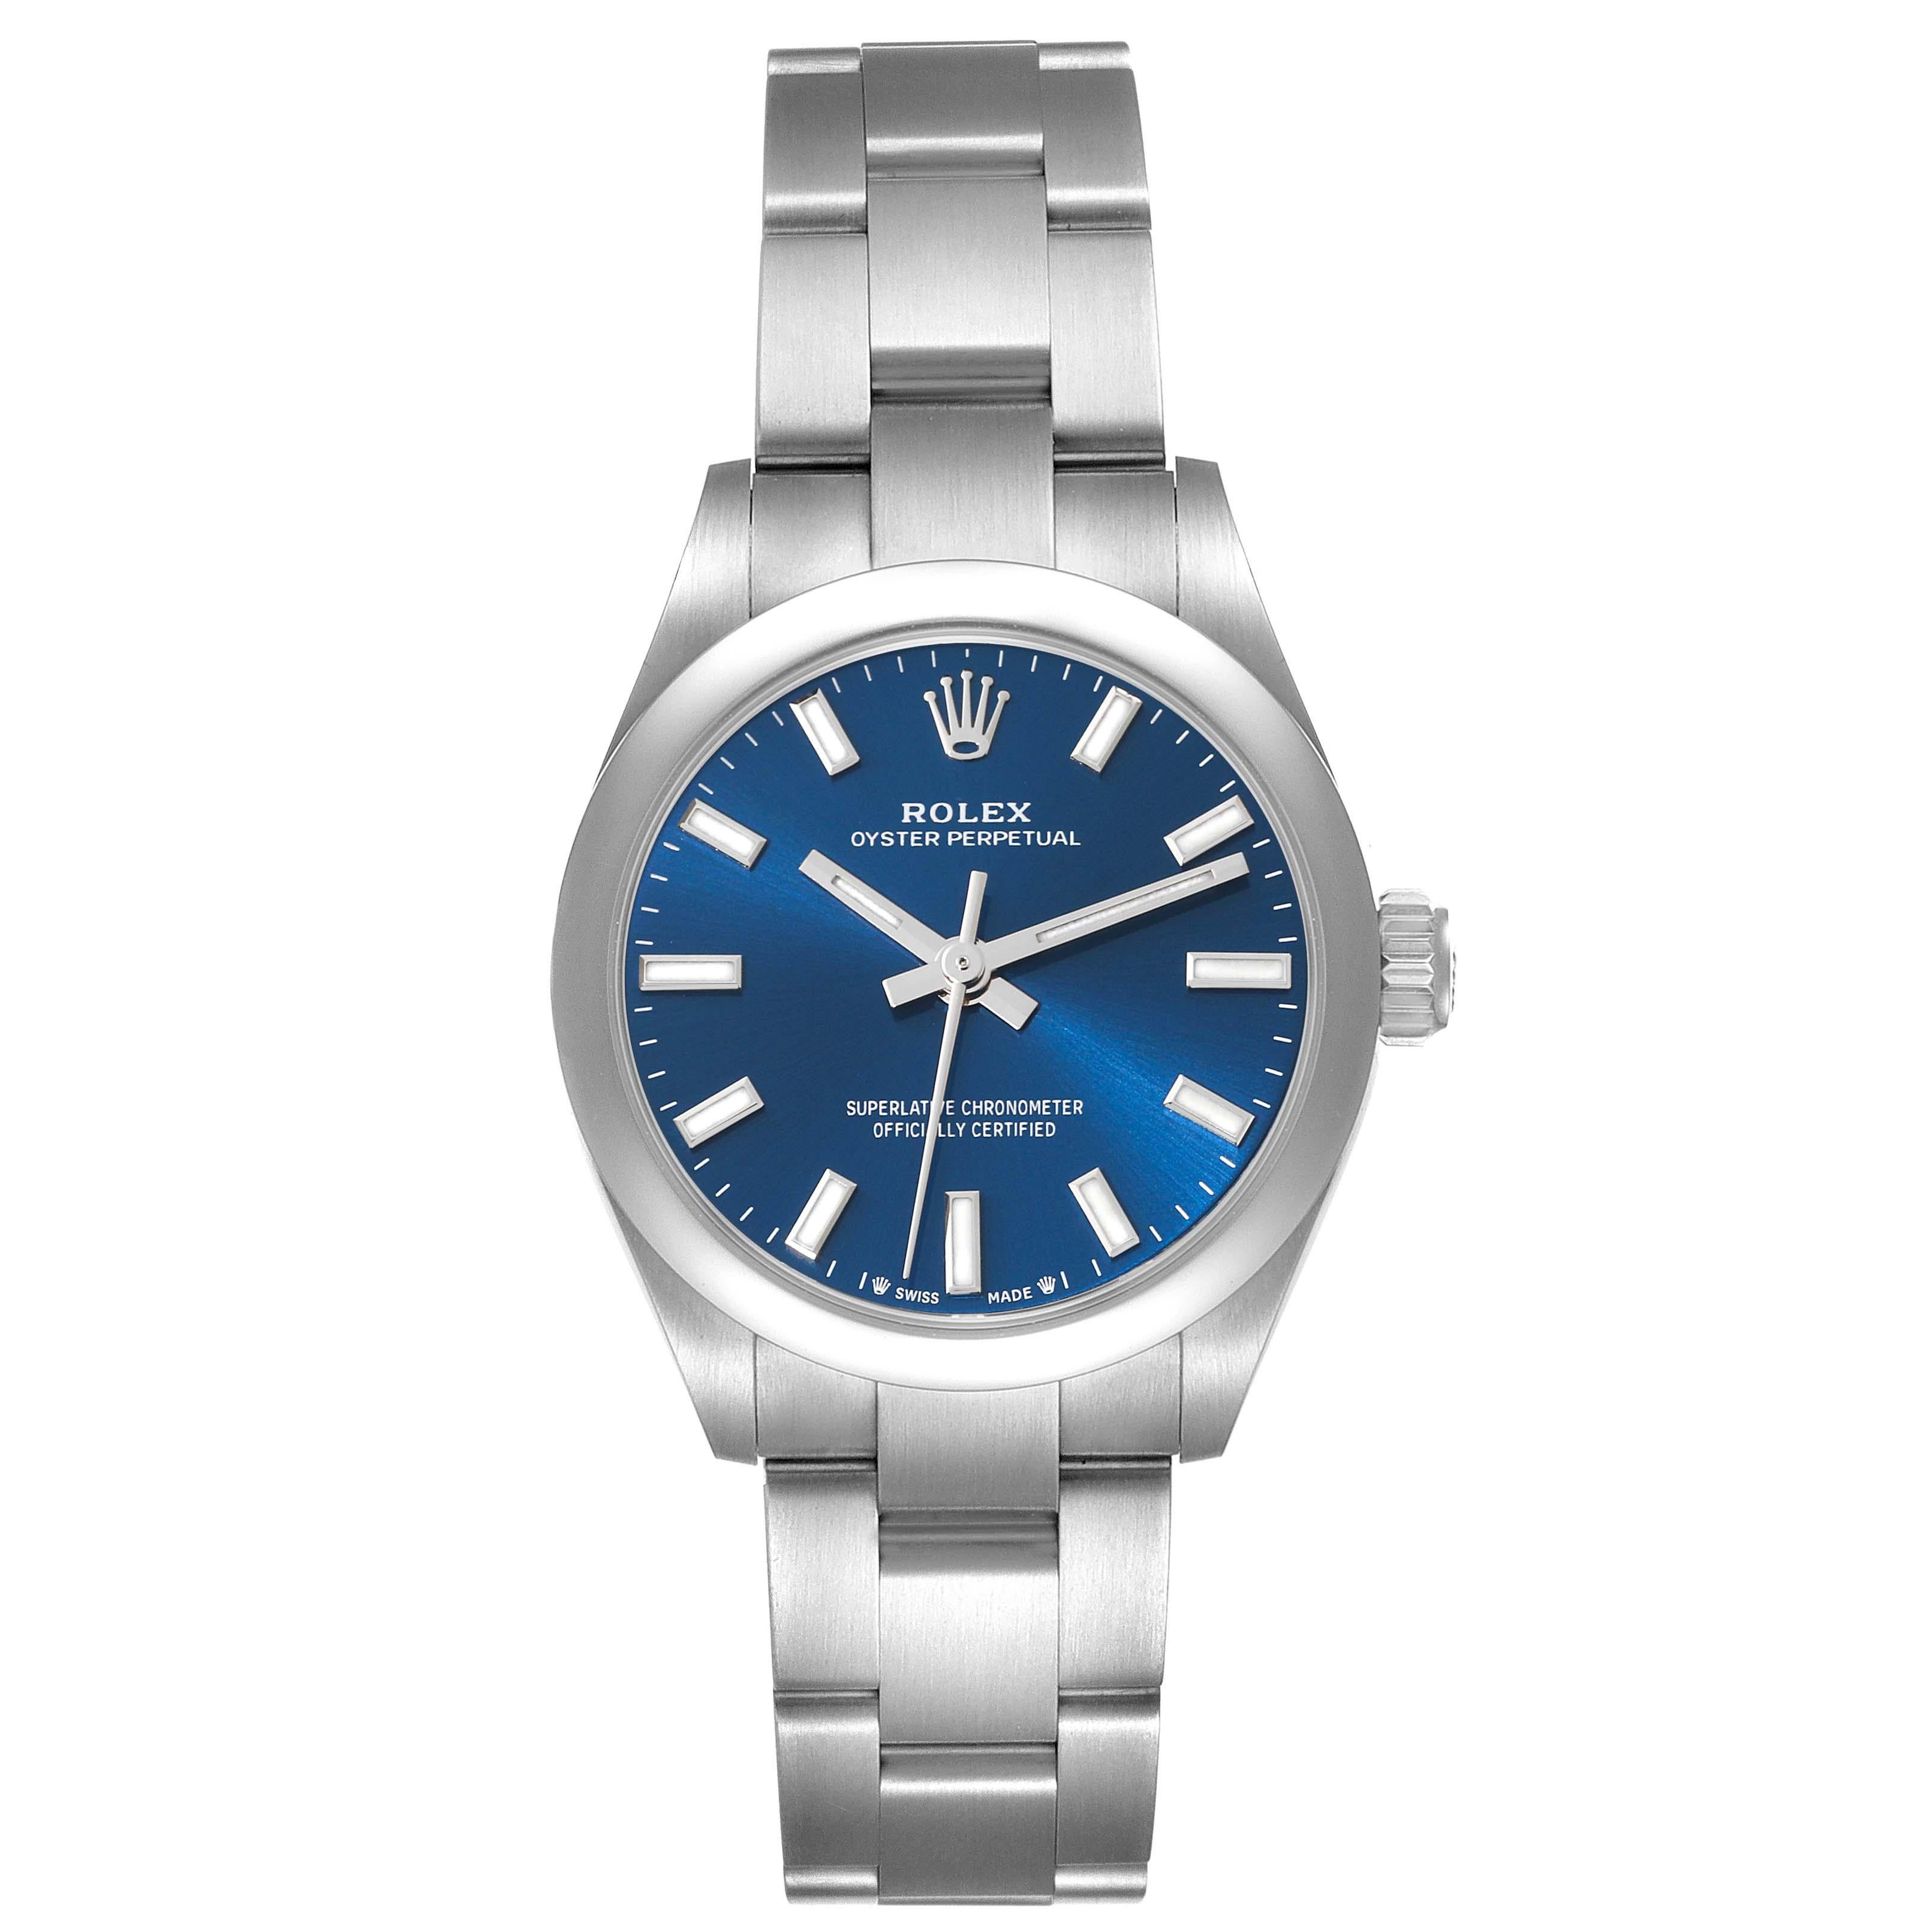 Rolex Oyster Perpetual Nondate Blue Dial Steel Ladies Watch 276200 Box Card. Officially certified chronometer self-winding movement. Stainless steel oyster case 28 mm in diameter. Rolex logo on a crown. Stainless steel smooth domed bezel. Scratch